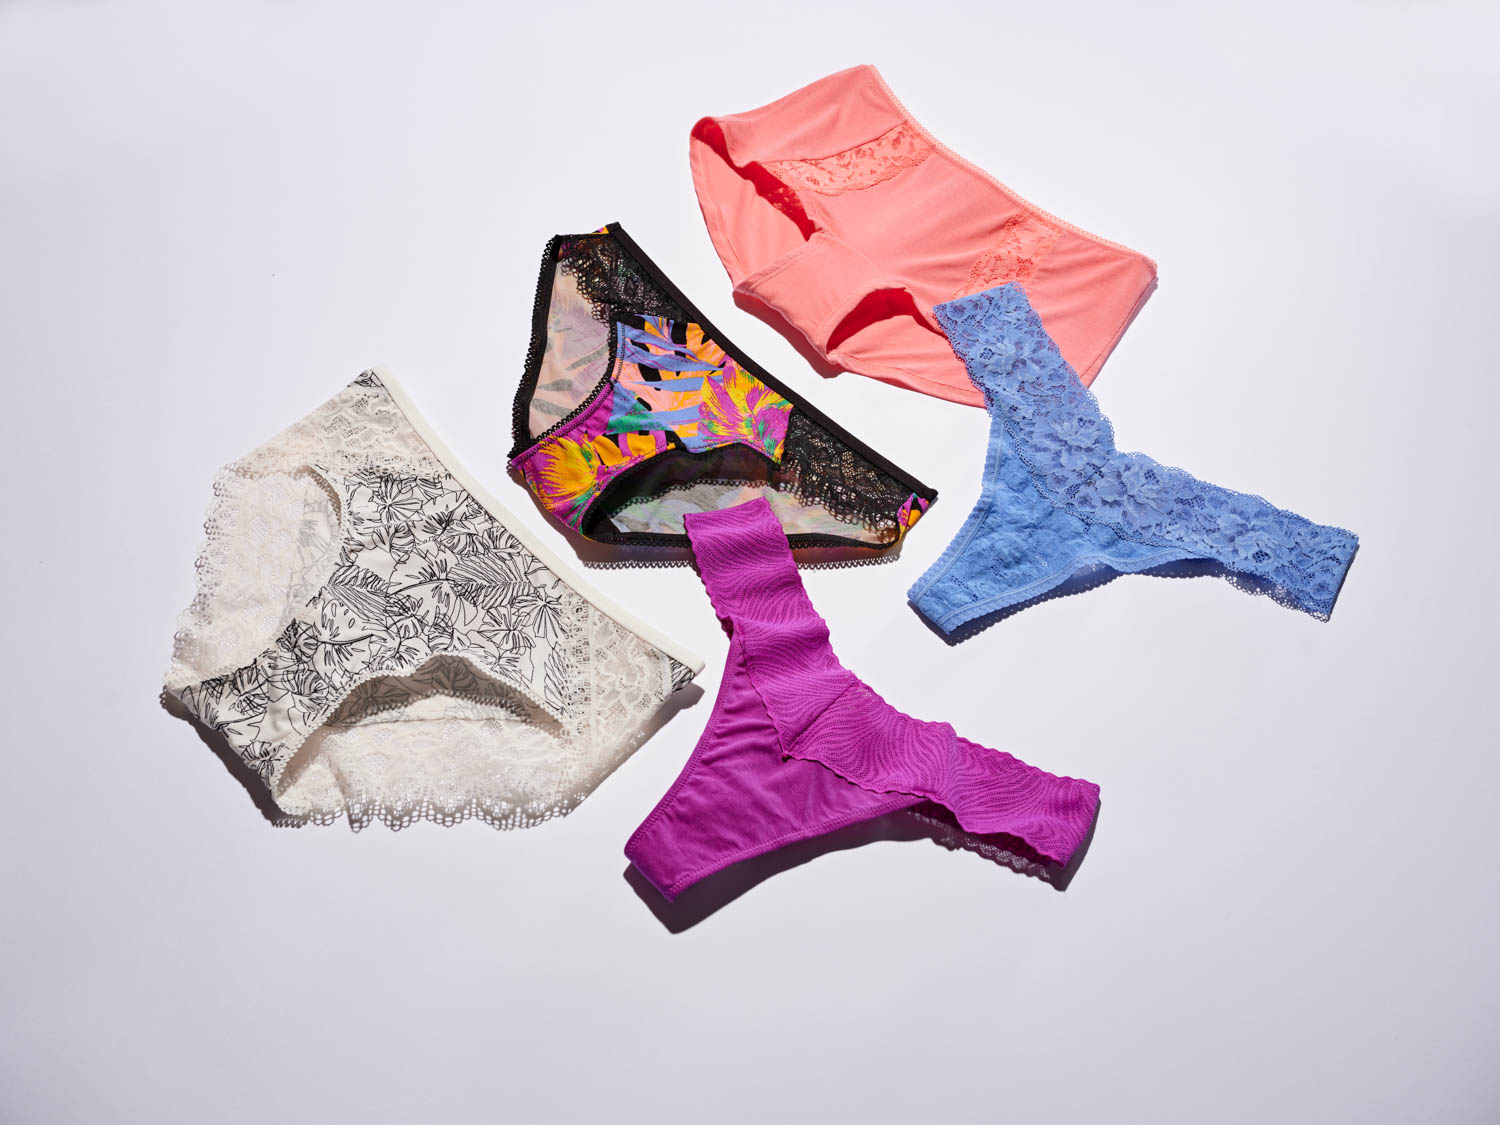 That lil' pocket in underwear - WHO IS SHE?! Meet the gusset. #womensh, Gusset